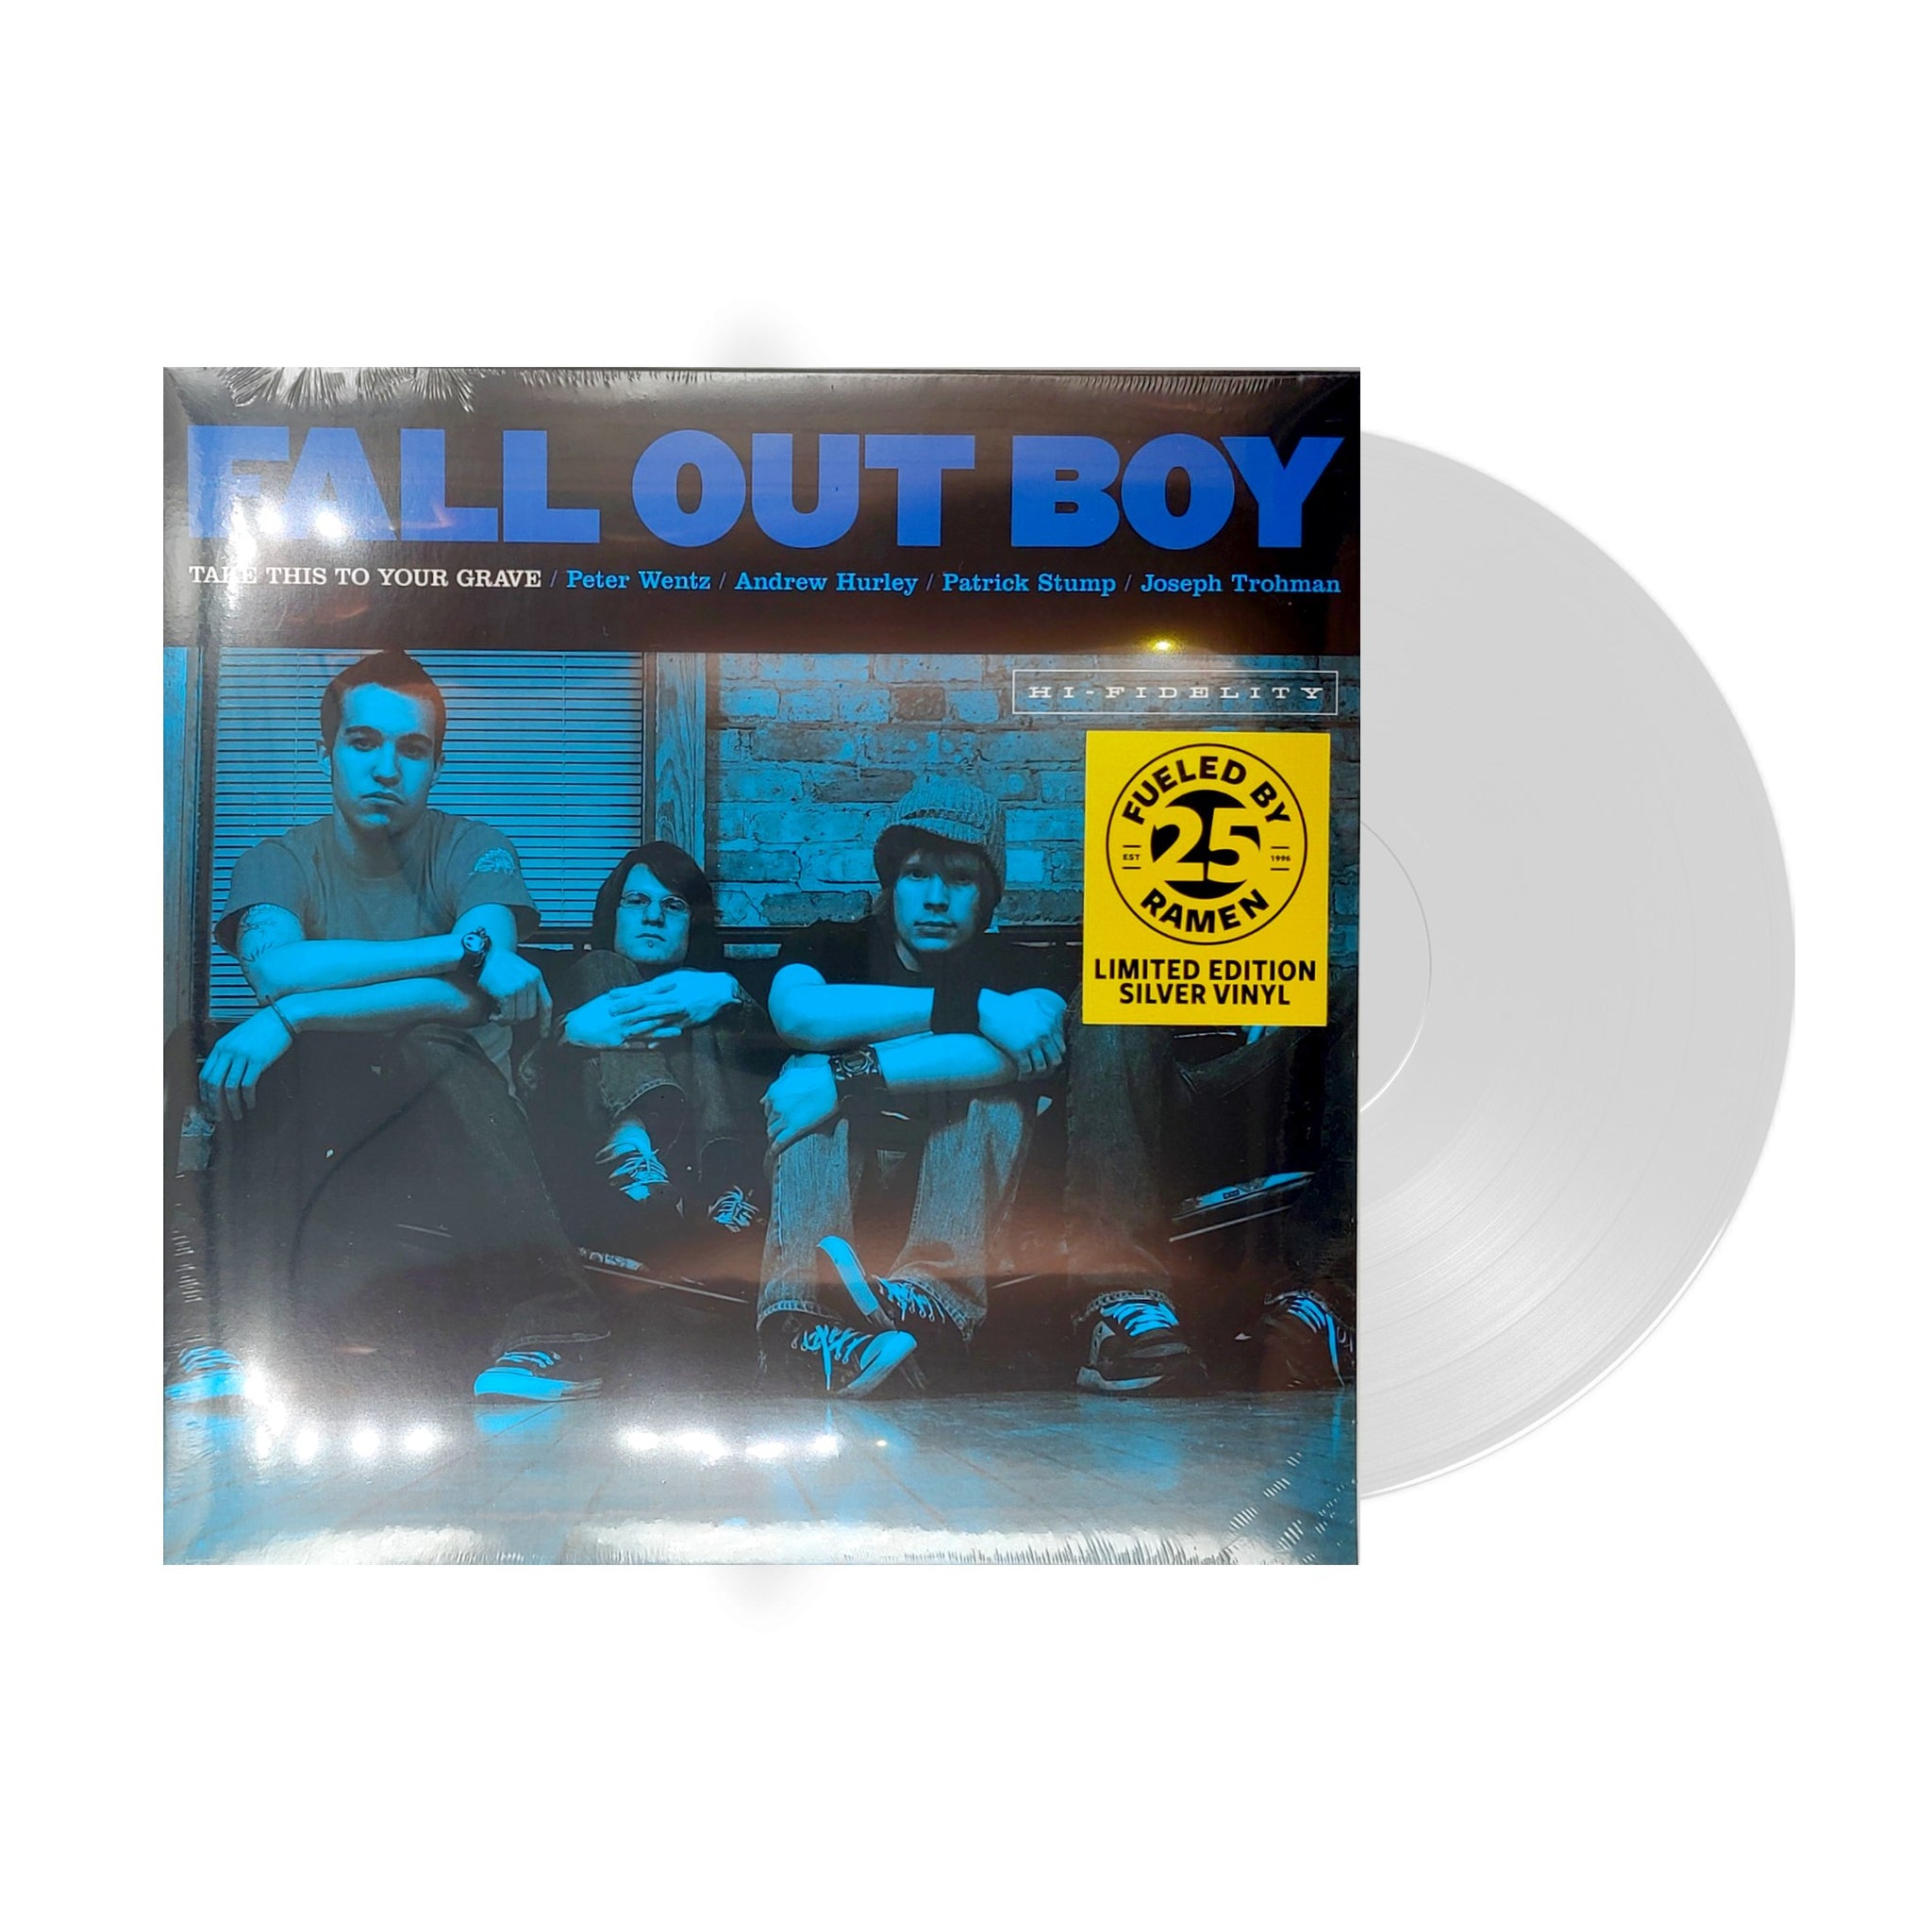 Fall Out Boy - Take This To Your Grave (Silver Vinyl)